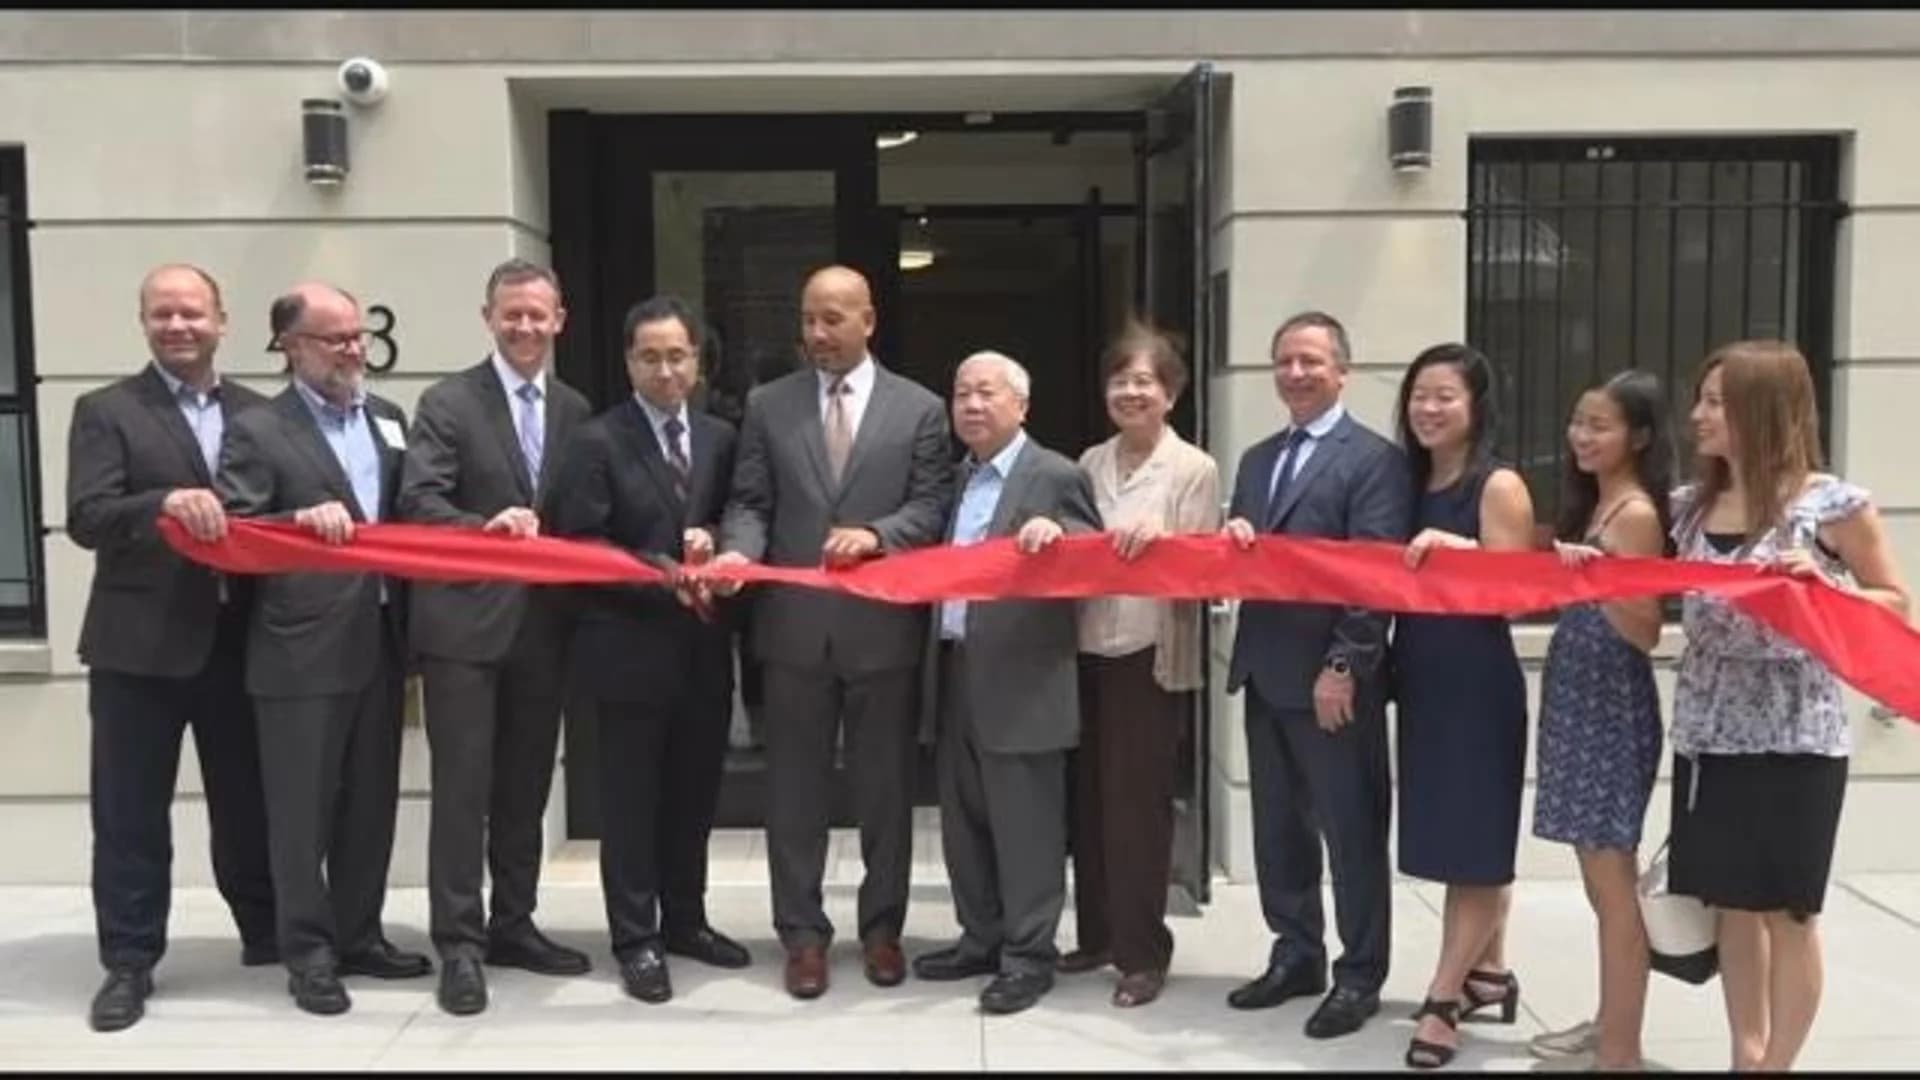 New Mott Haven affordable housing complex opens